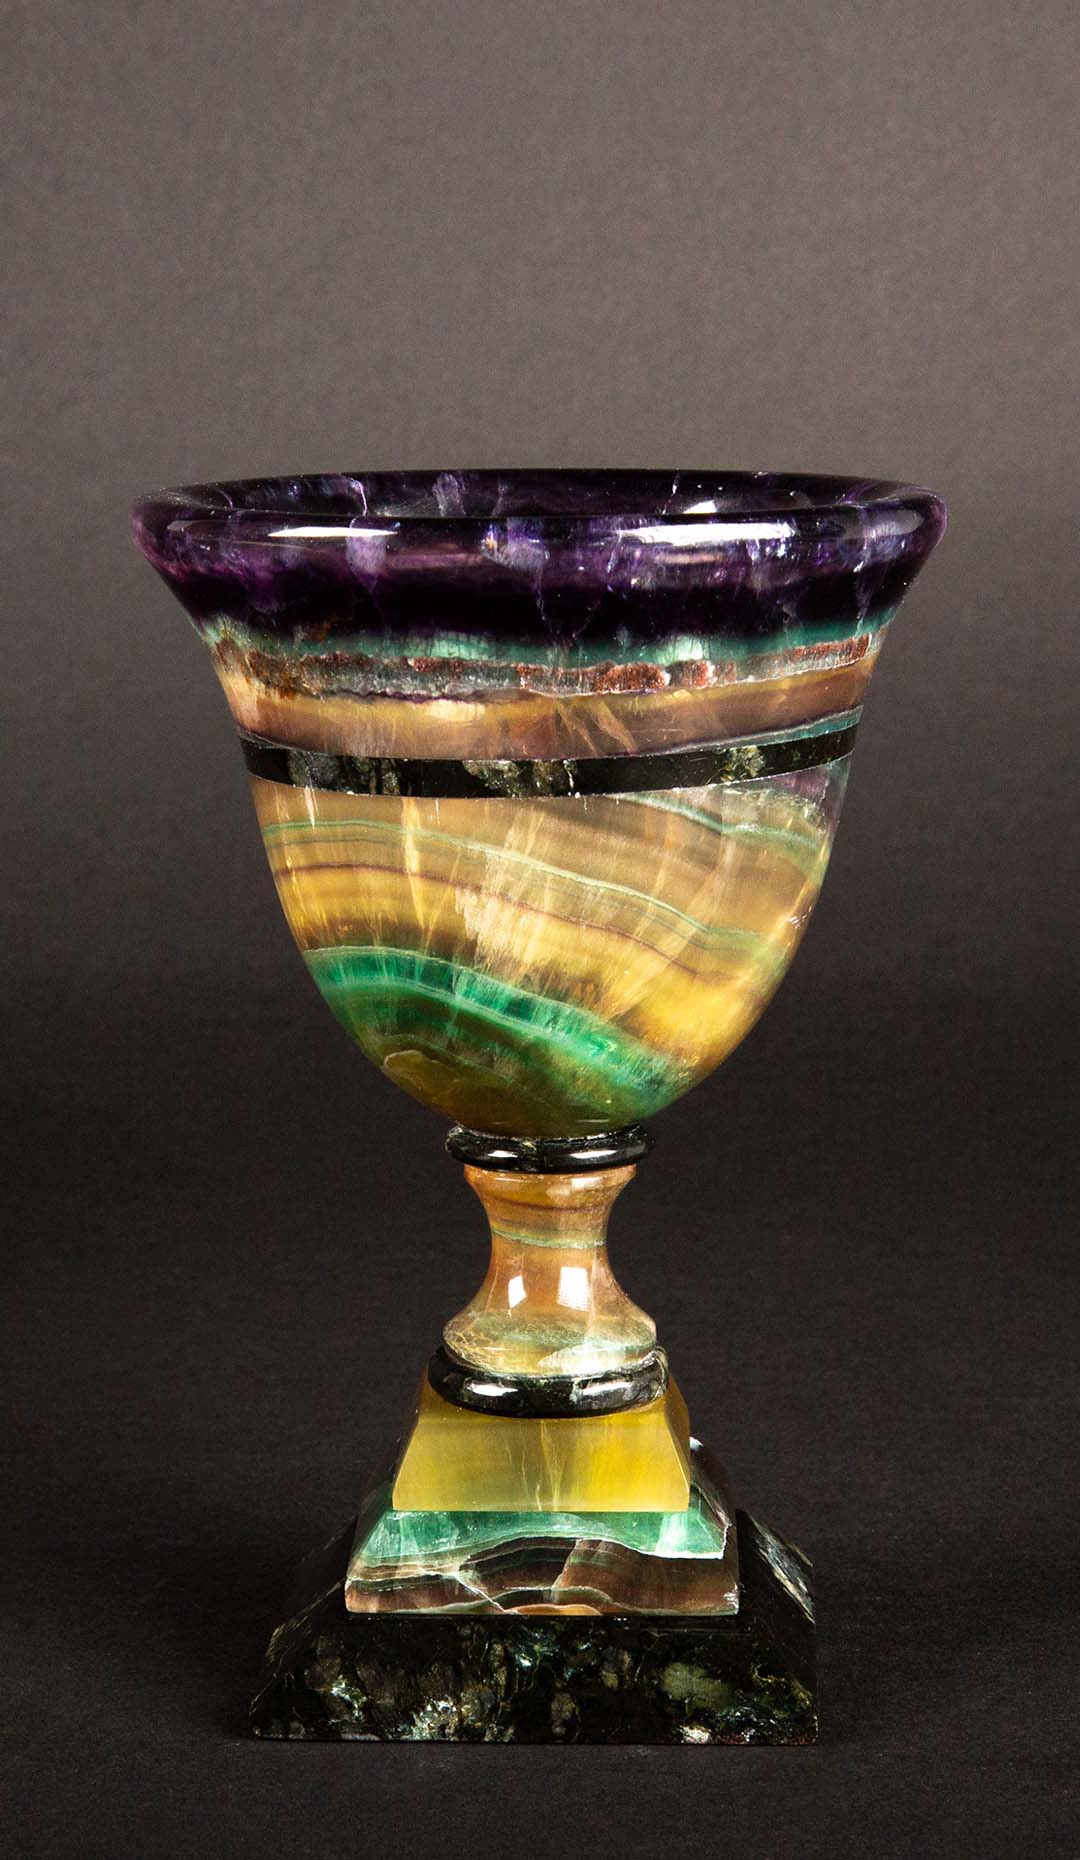 Argentinian Artistry: Hand-Carved Multi-Colored Fluorite Chalice